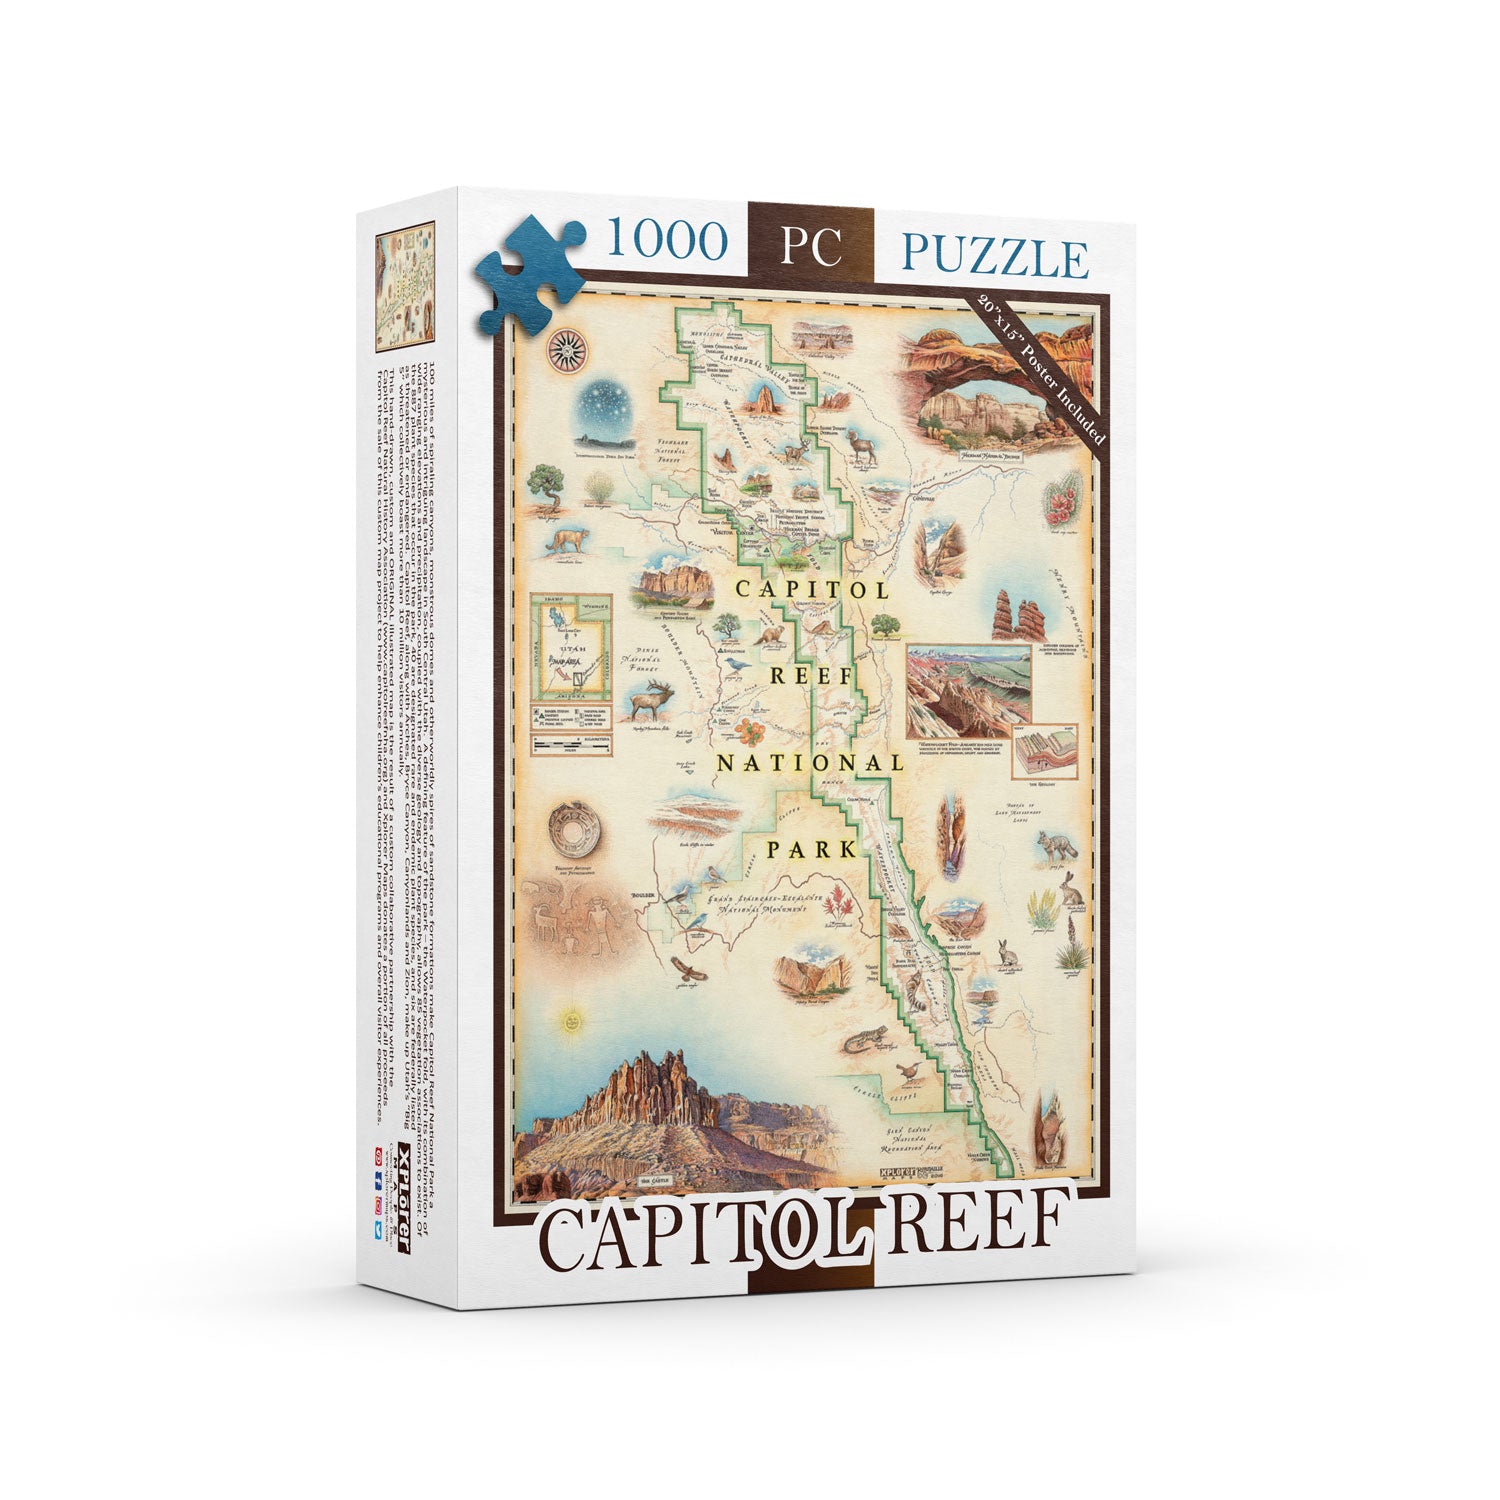 Utah's Capitol Reef National Park map 1000-piece puzzle.  Featuring Claret Cup Cactus, Narrowleaf Yucca, Prince's Plume, and the Two-Needle Pinyon Pine. Detailed depictions of landmarks and geographic wonders like the Lower Muley Twist Canyon, Capitol Gorge, and Hickman Natural Bridge. 